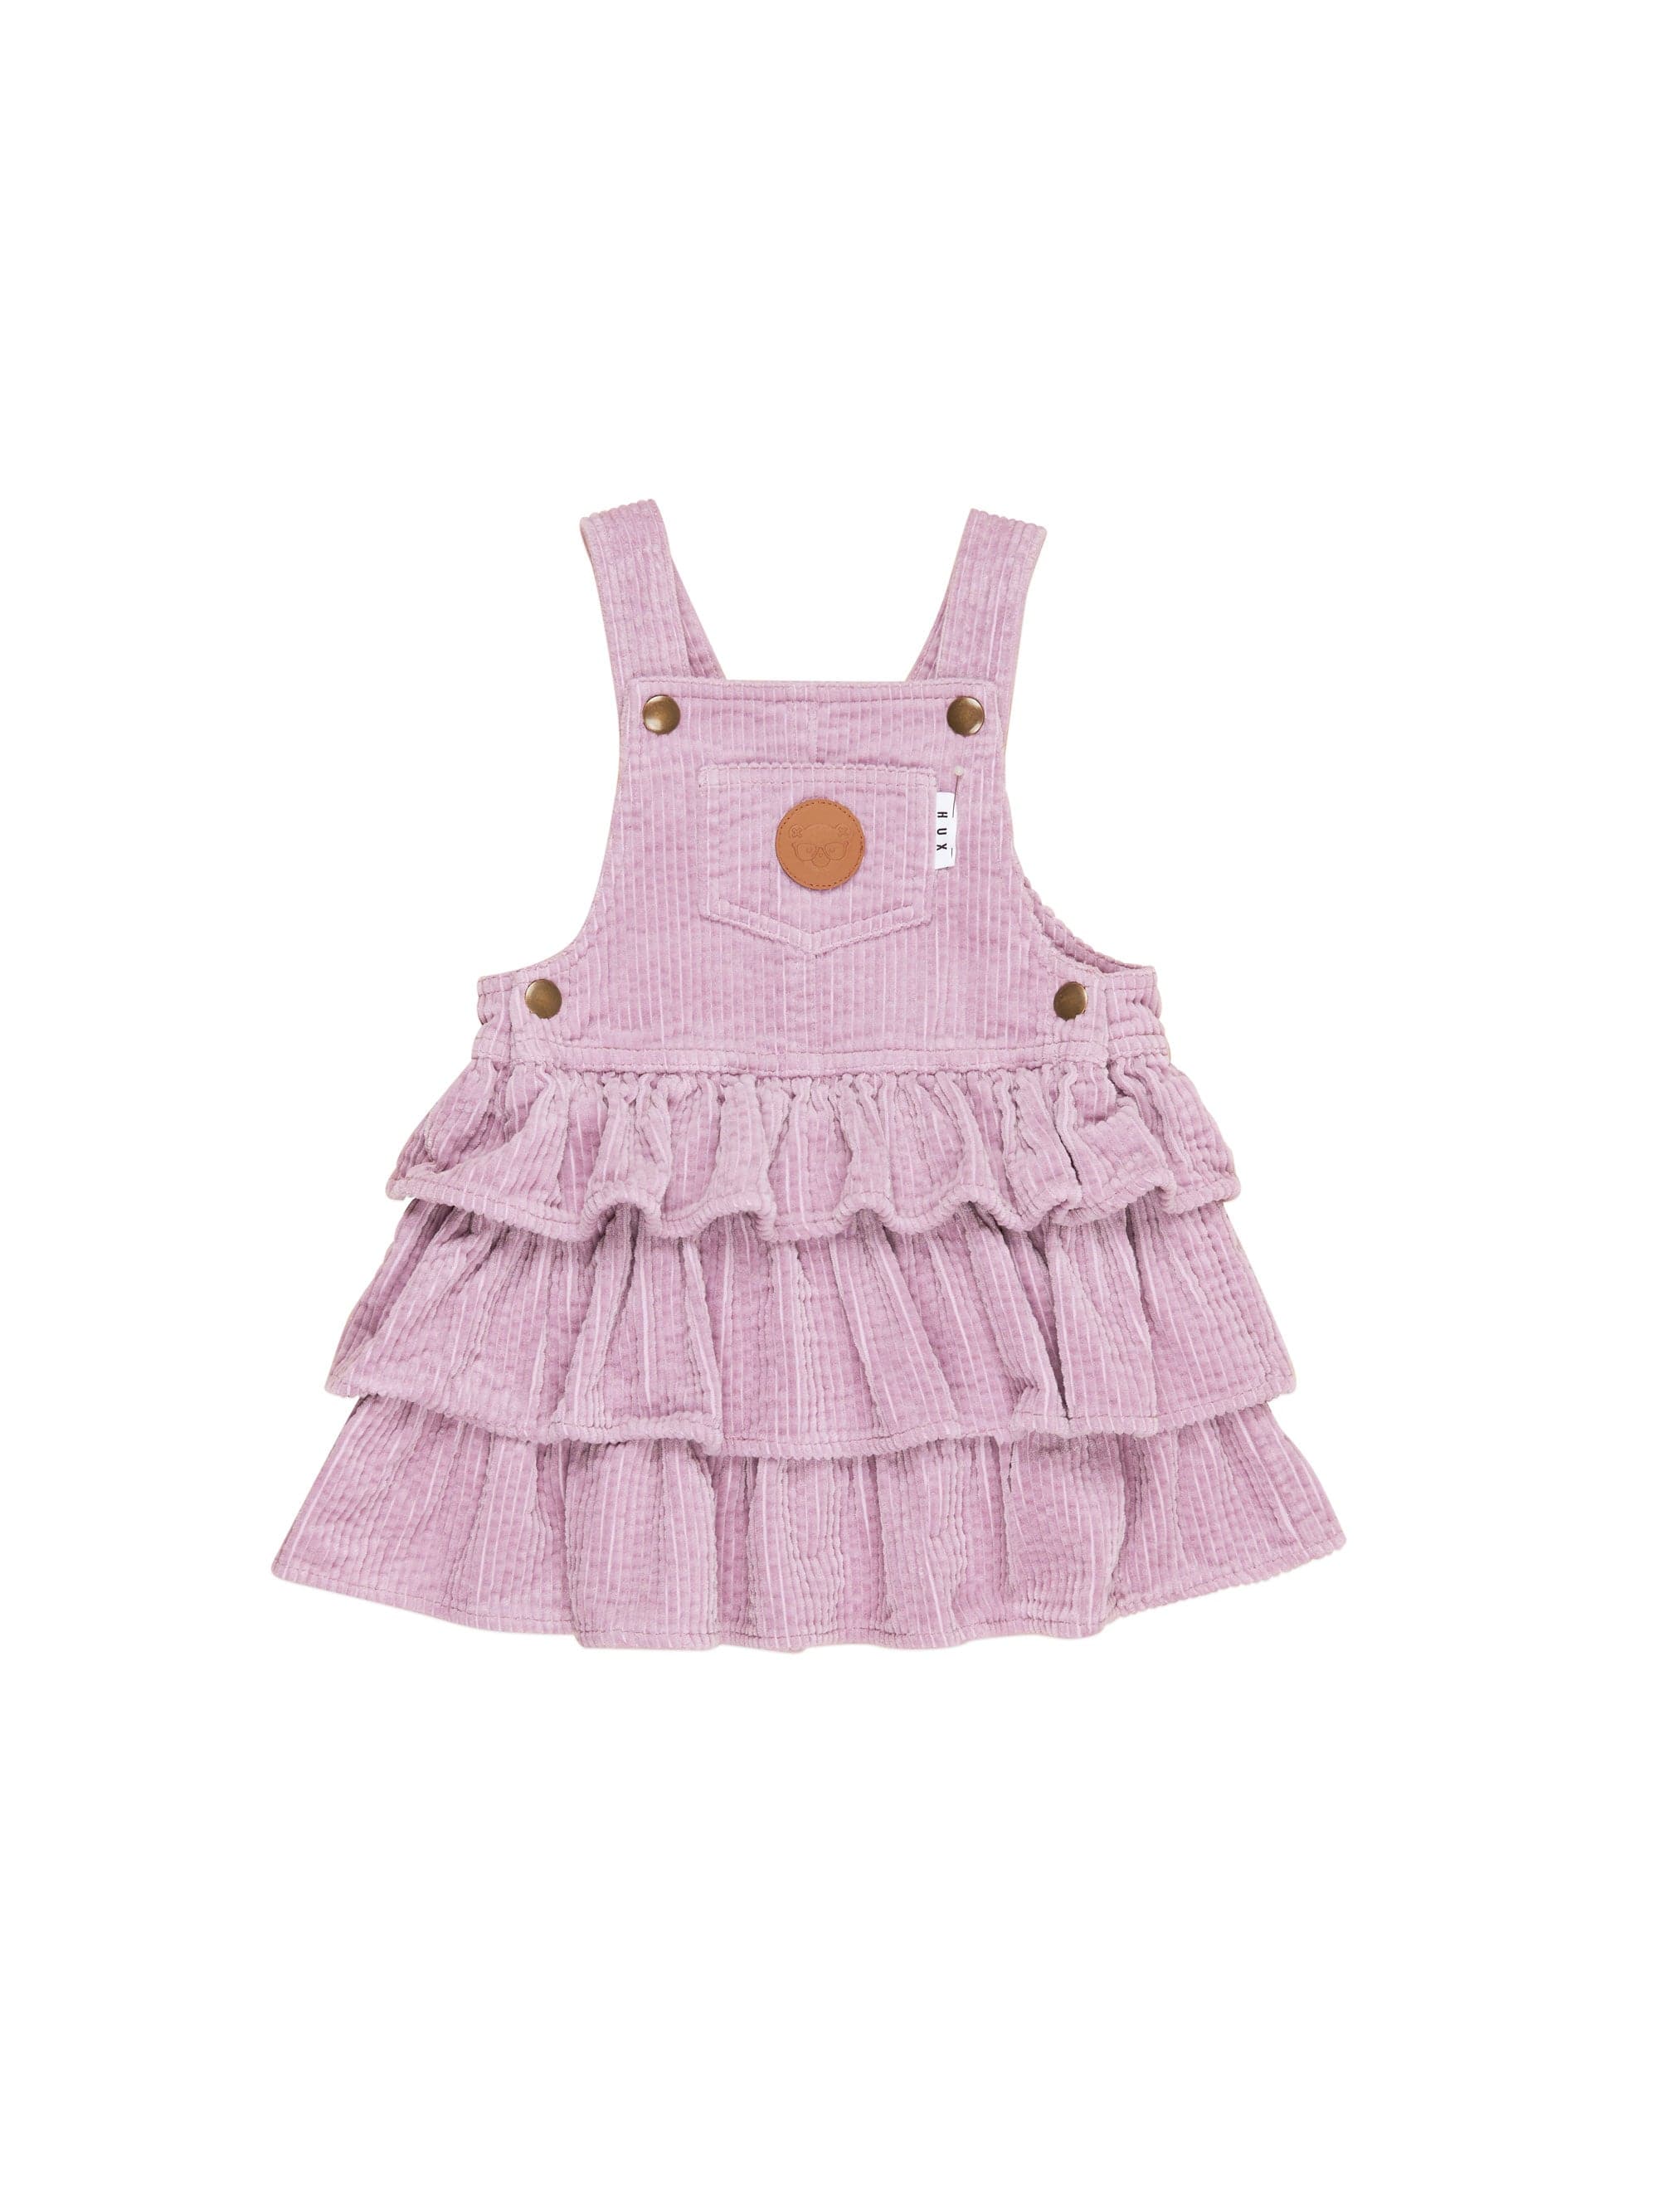 Huxbaby Girls Dress Orchid Cord Frill Overall Dress